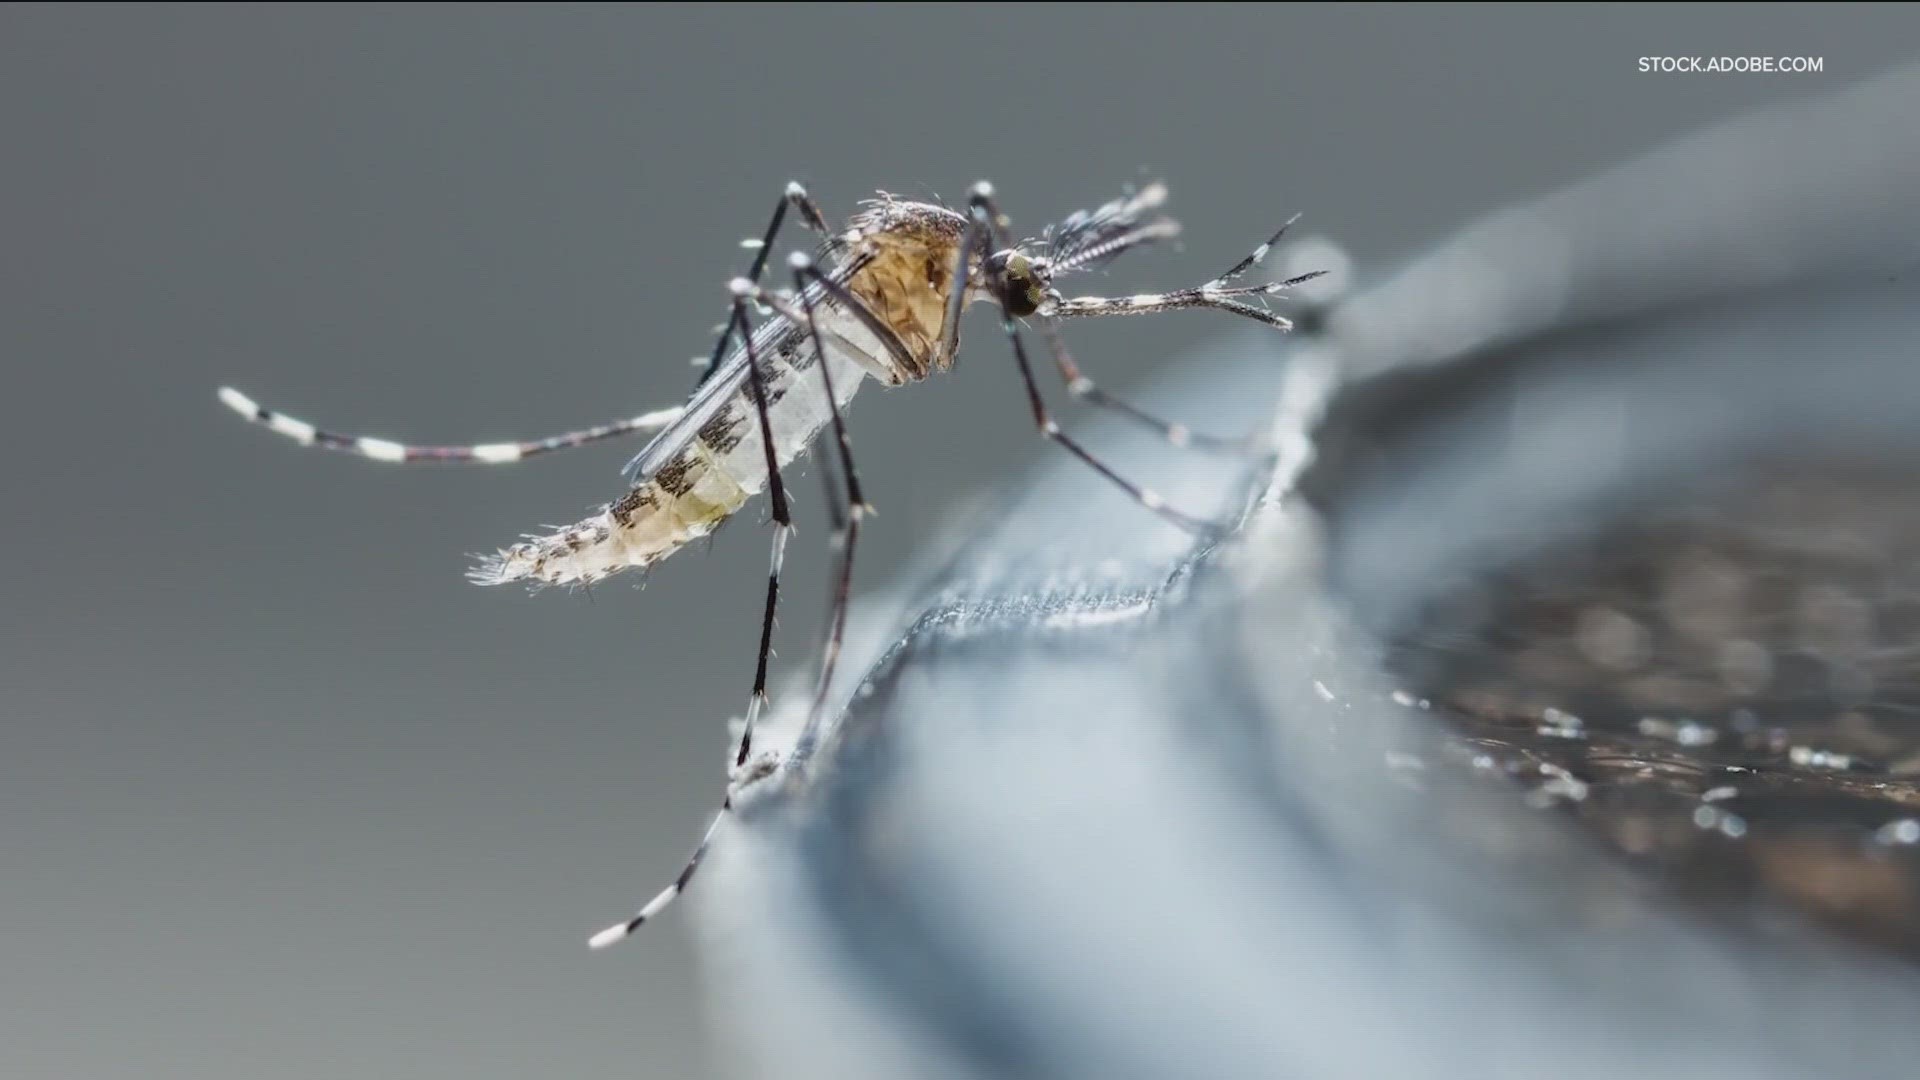 As of yet, there have been no cases of West Nile virus found in a human in Central Texas.